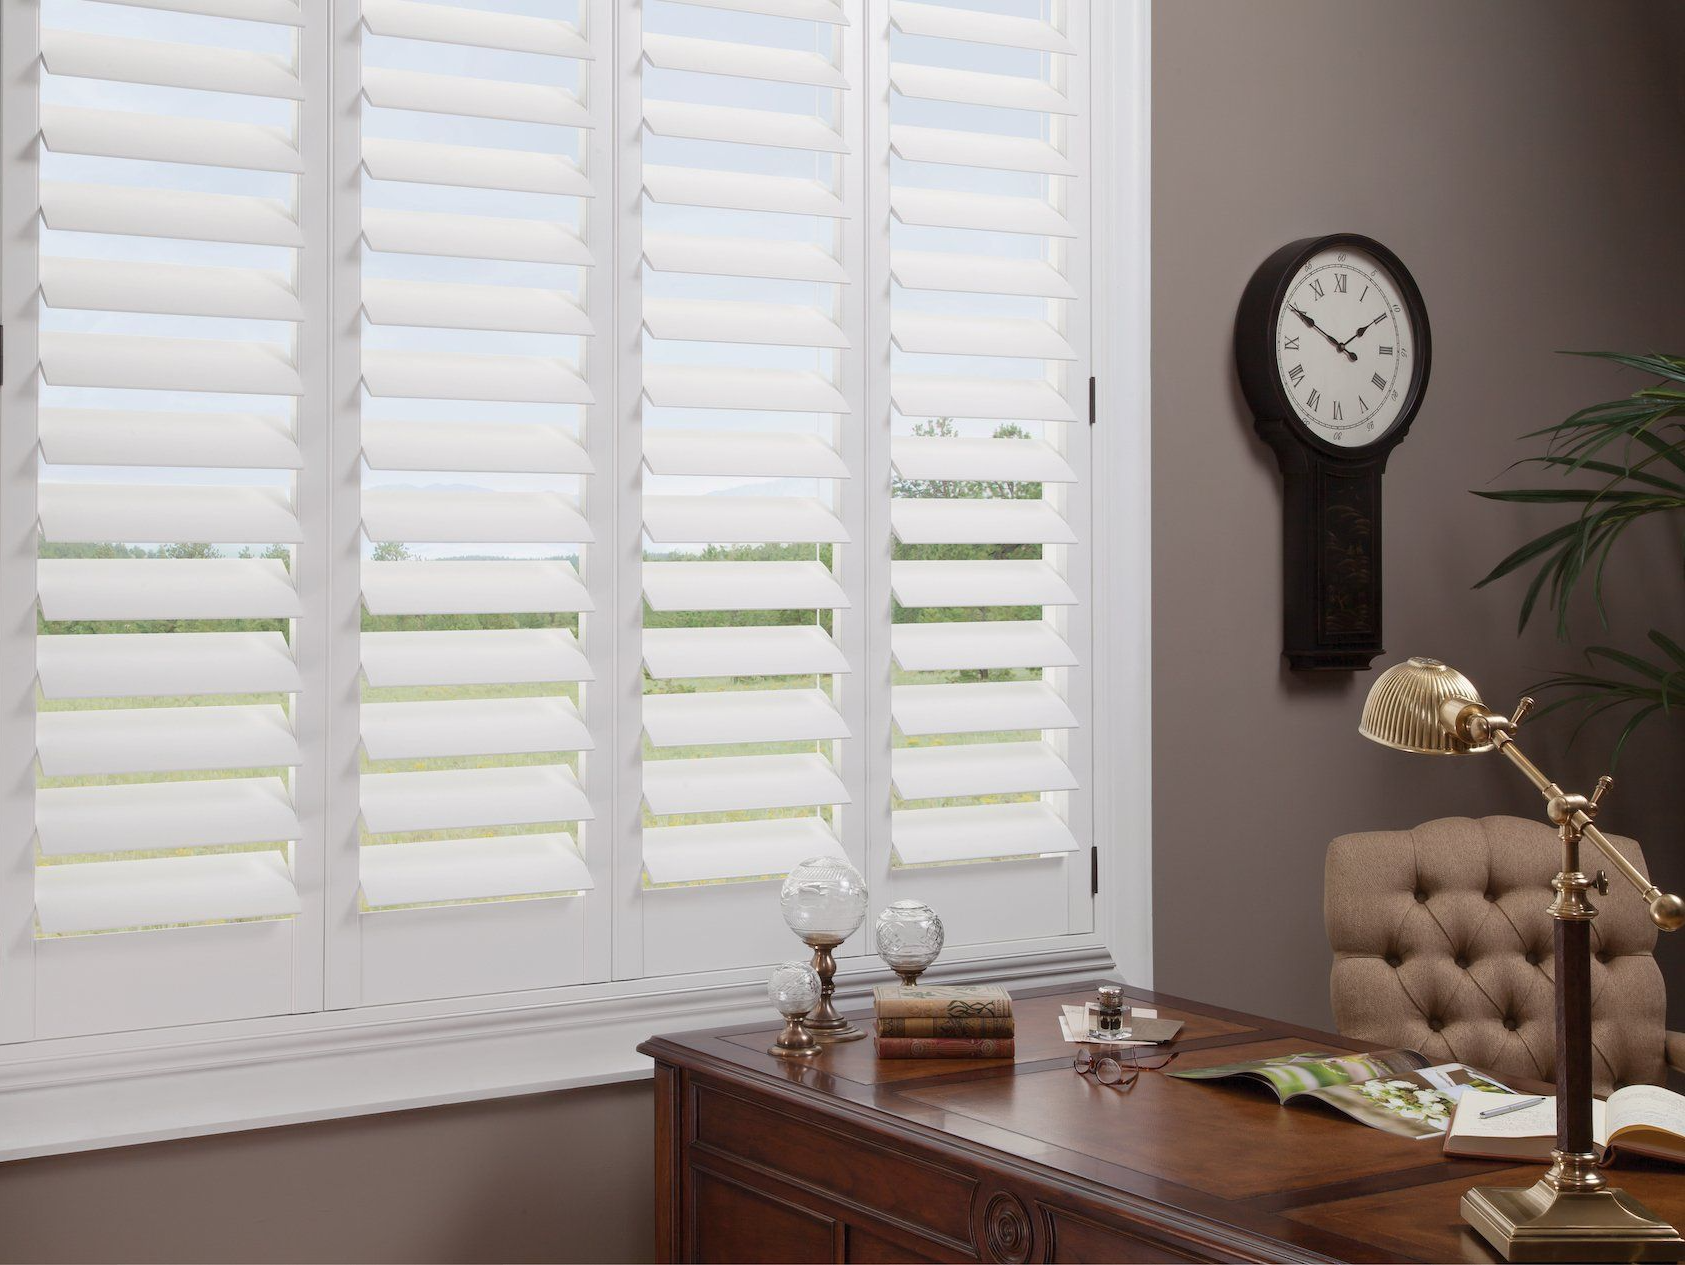 NewStyle® Hybrid Shutters Window coverings, window treatments, Hunter Douglas, The Perfect Shade near Monument, Colorado (CO)